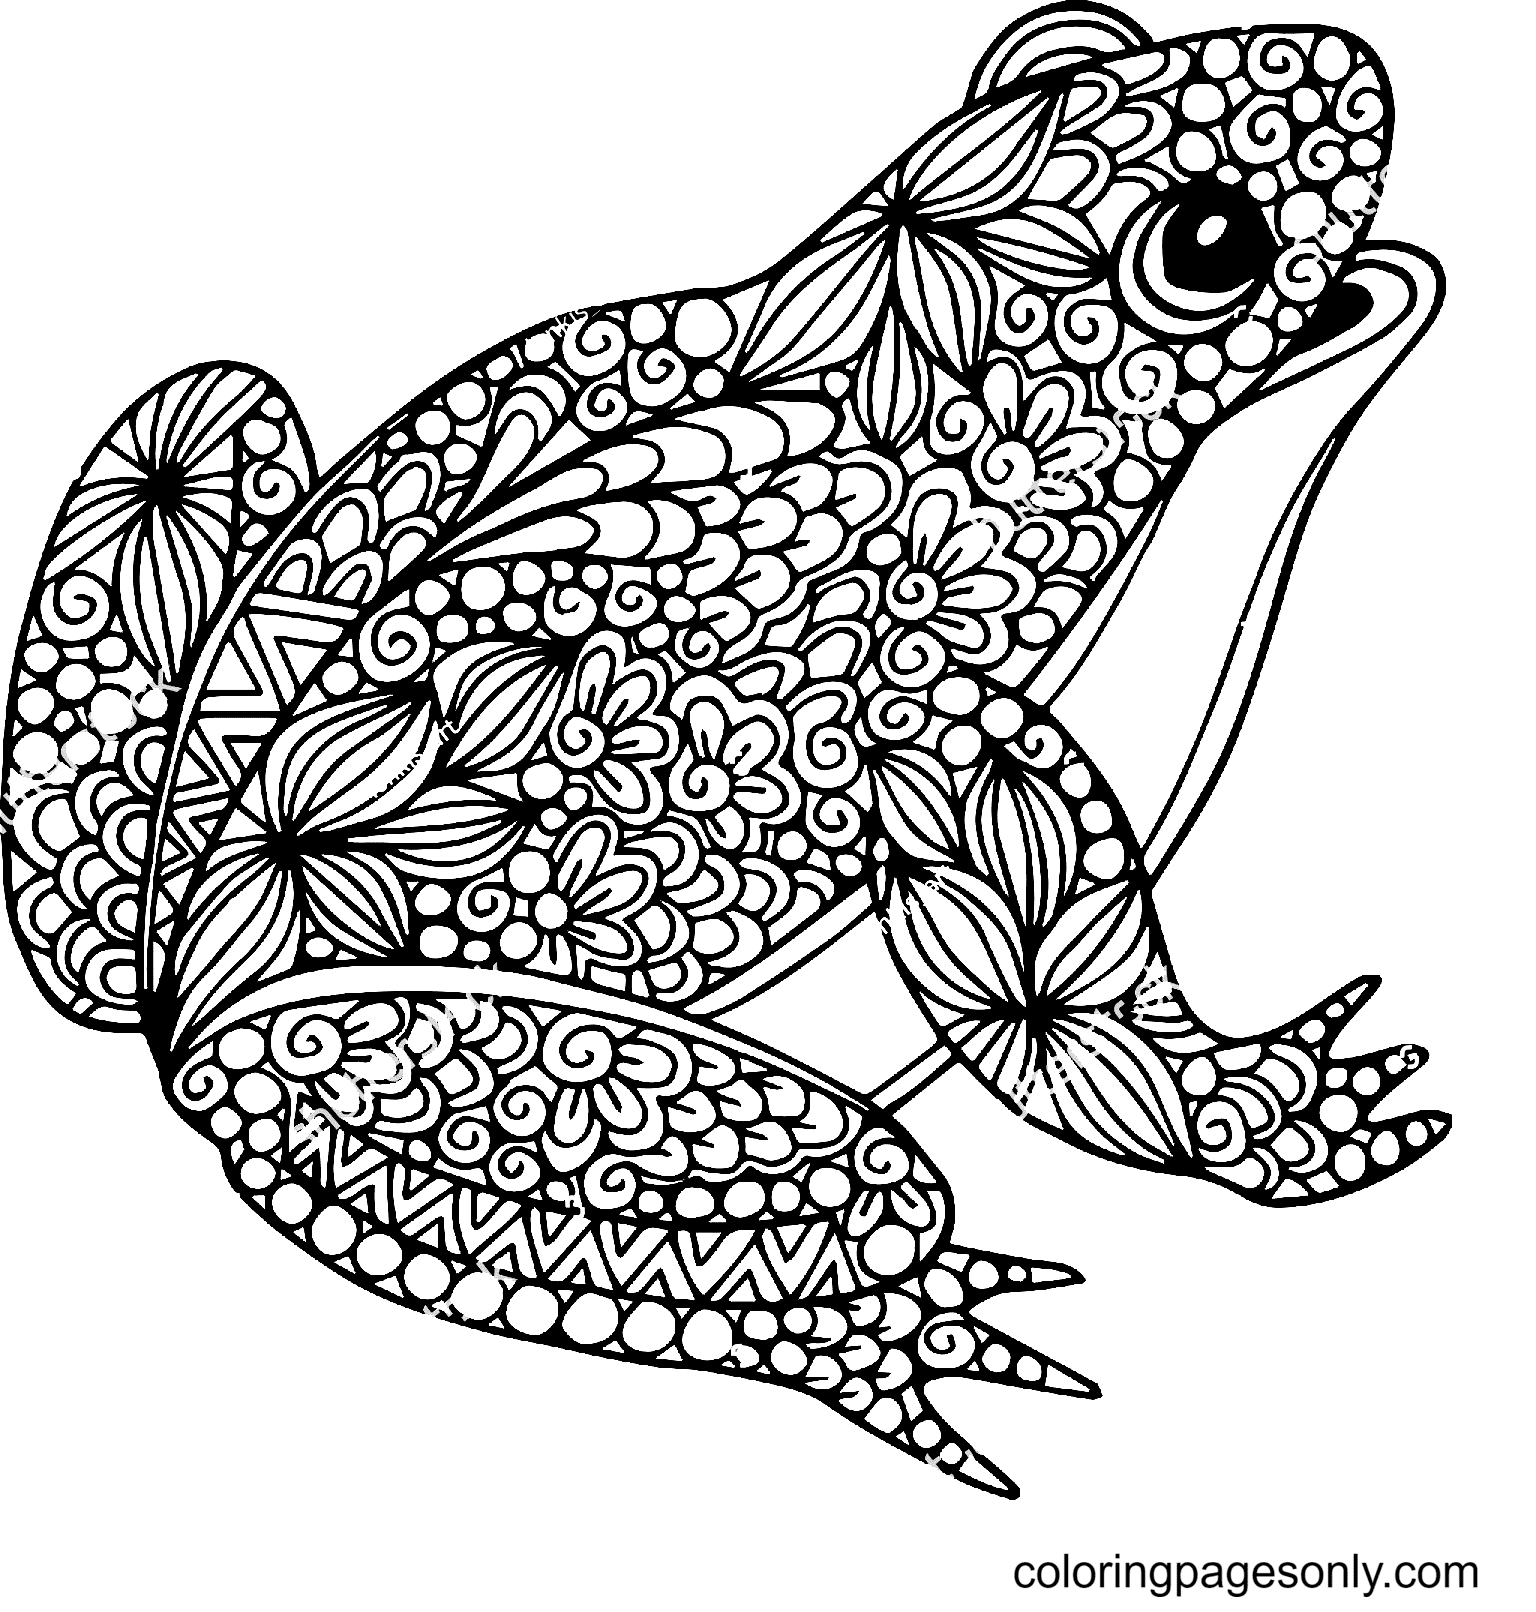 Frog Coloring Pages   Coloring Pages For Kids And Adults